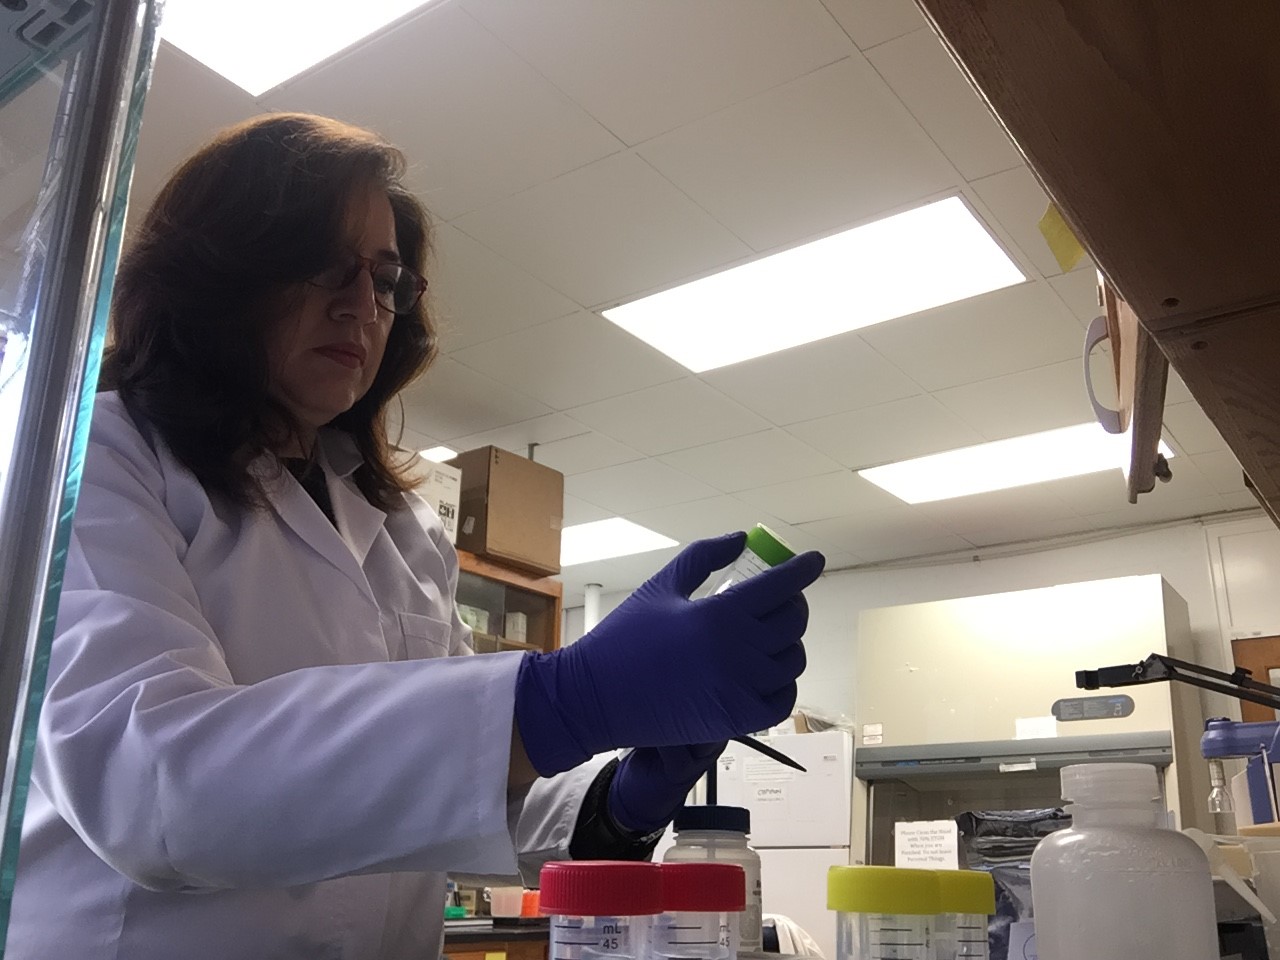 Maria working in the lab